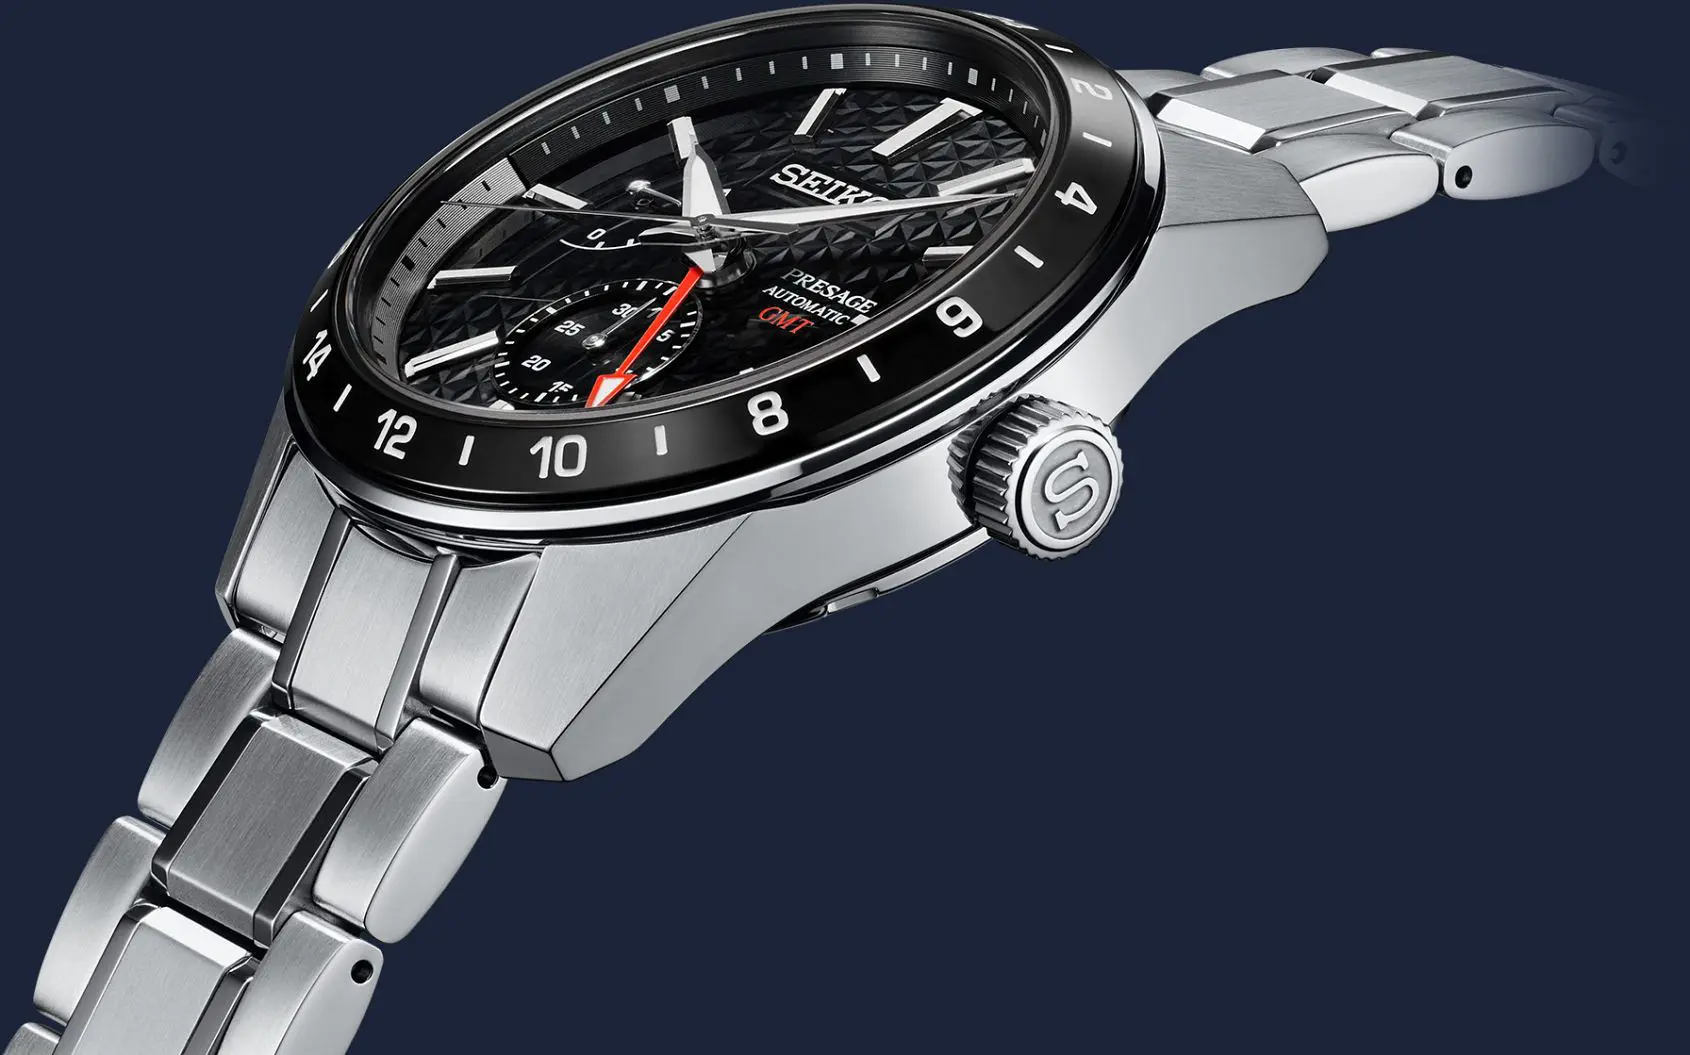 INTRODUCING: The Seiko Presage Sharp Edged GMT Collection